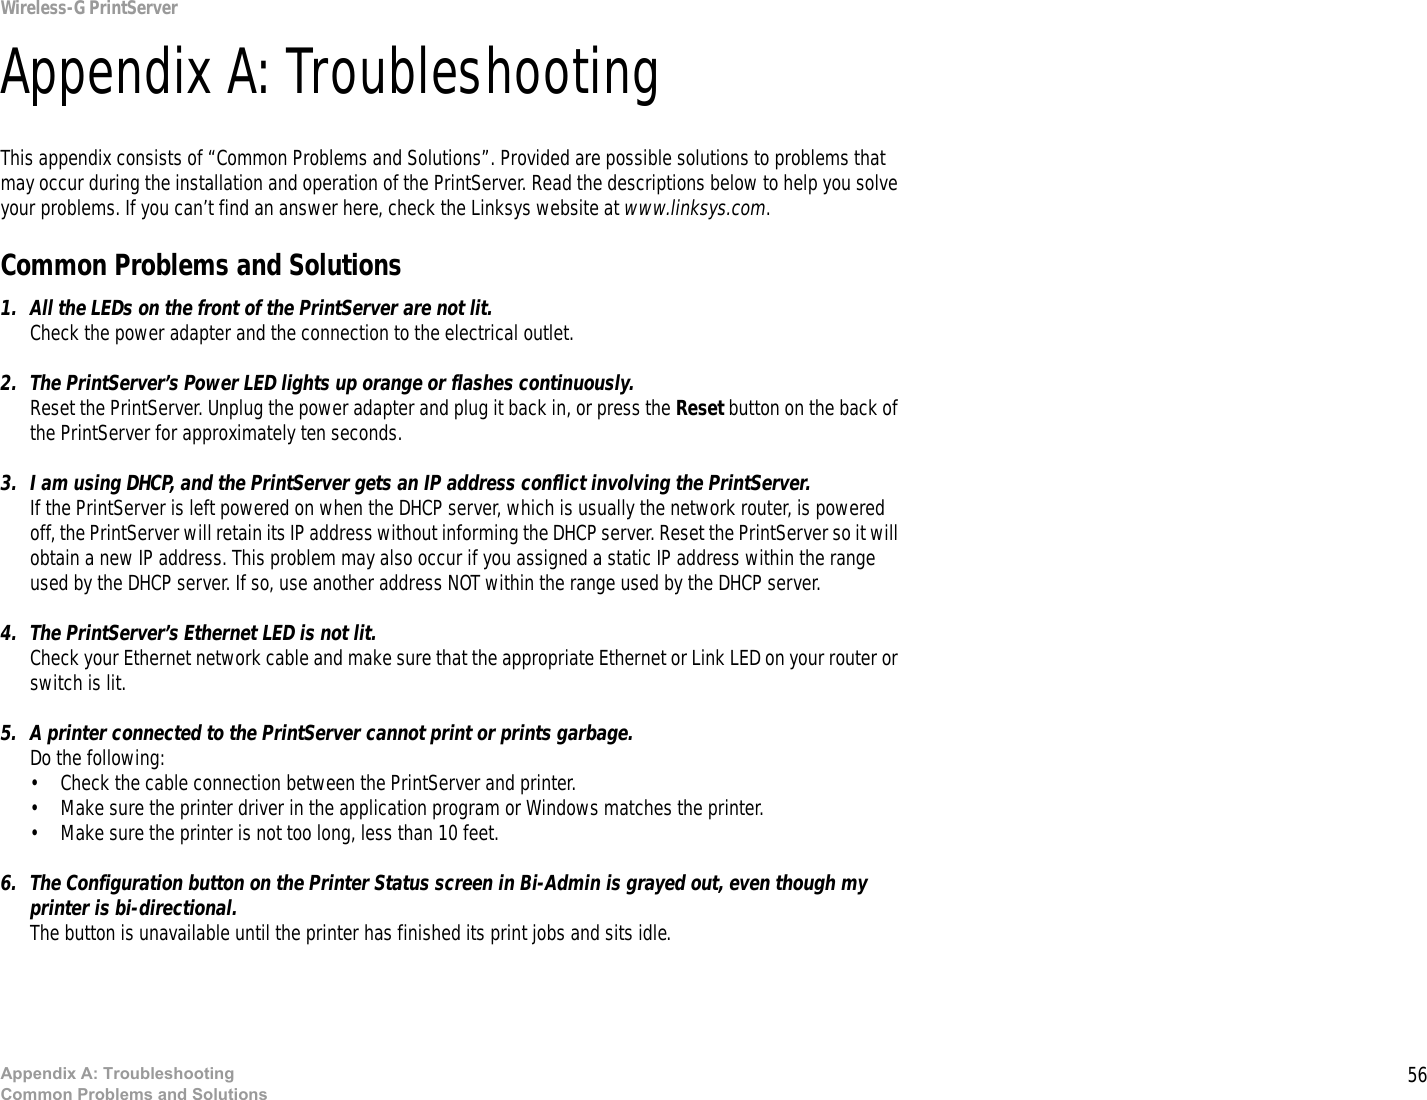 56Appendix A: TroubleshootingCommon Problems and SolutionsWireless-G PrintServerAppendix A: TroubleshootingThis appendix consists of “Common Problems and Solutions”. Provided are possible solutions to problems that may occur during the installation and operation of the PrintServer. Read the descriptions below to help you solve your problems. If you can’t find an answer here, check the Linksys website at www.linksys.com.Common Problems and Solutions1. All the LEDs on the front of the PrintServer are not lit.Check the power adapter and the connection to the electrical outlet.2. The PrintServer’s Power LED lights up orange or flashes continuously.Reset the PrintServer. Unplug the power adapter and plug it back in, or press the Reset button on the back of the PrintServer for approximately ten seconds.3. I am using DHCP, and the PrintServer gets an IP address conflict involving the PrintServer.If the PrintServer is left powered on when the DHCP server, which is usually the network router, is powered off, the PrintServer will retain its IP address without informing the DHCP server. Reset the PrintServer so it will obtain a new IP address. This problem may also occur if you assigned a static IP address within the range used by the DHCP server. If so, use another address NOT within the range used by the DHCP server.4. The PrintServer’s Ethernet LED is not lit.Check your Ethernet network cable and make sure that the appropriate Ethernet or Link LED on your router or switch is lit. 5. A printer connected to the PrintServer cannot print or prints garbage.Do the following:• Check the cable connection between the PrintServer and printer.• Make sure the printer driver in the application program or Windows matches the printer.• Make sure the printer is not too long, less than 10 feet.6. The Configuration button on the Printer Status screen in Bi-Admin is grayed out, even though my printer is bi-directional. The button is unavailable until the printer has finished its print jobs and sits idle.